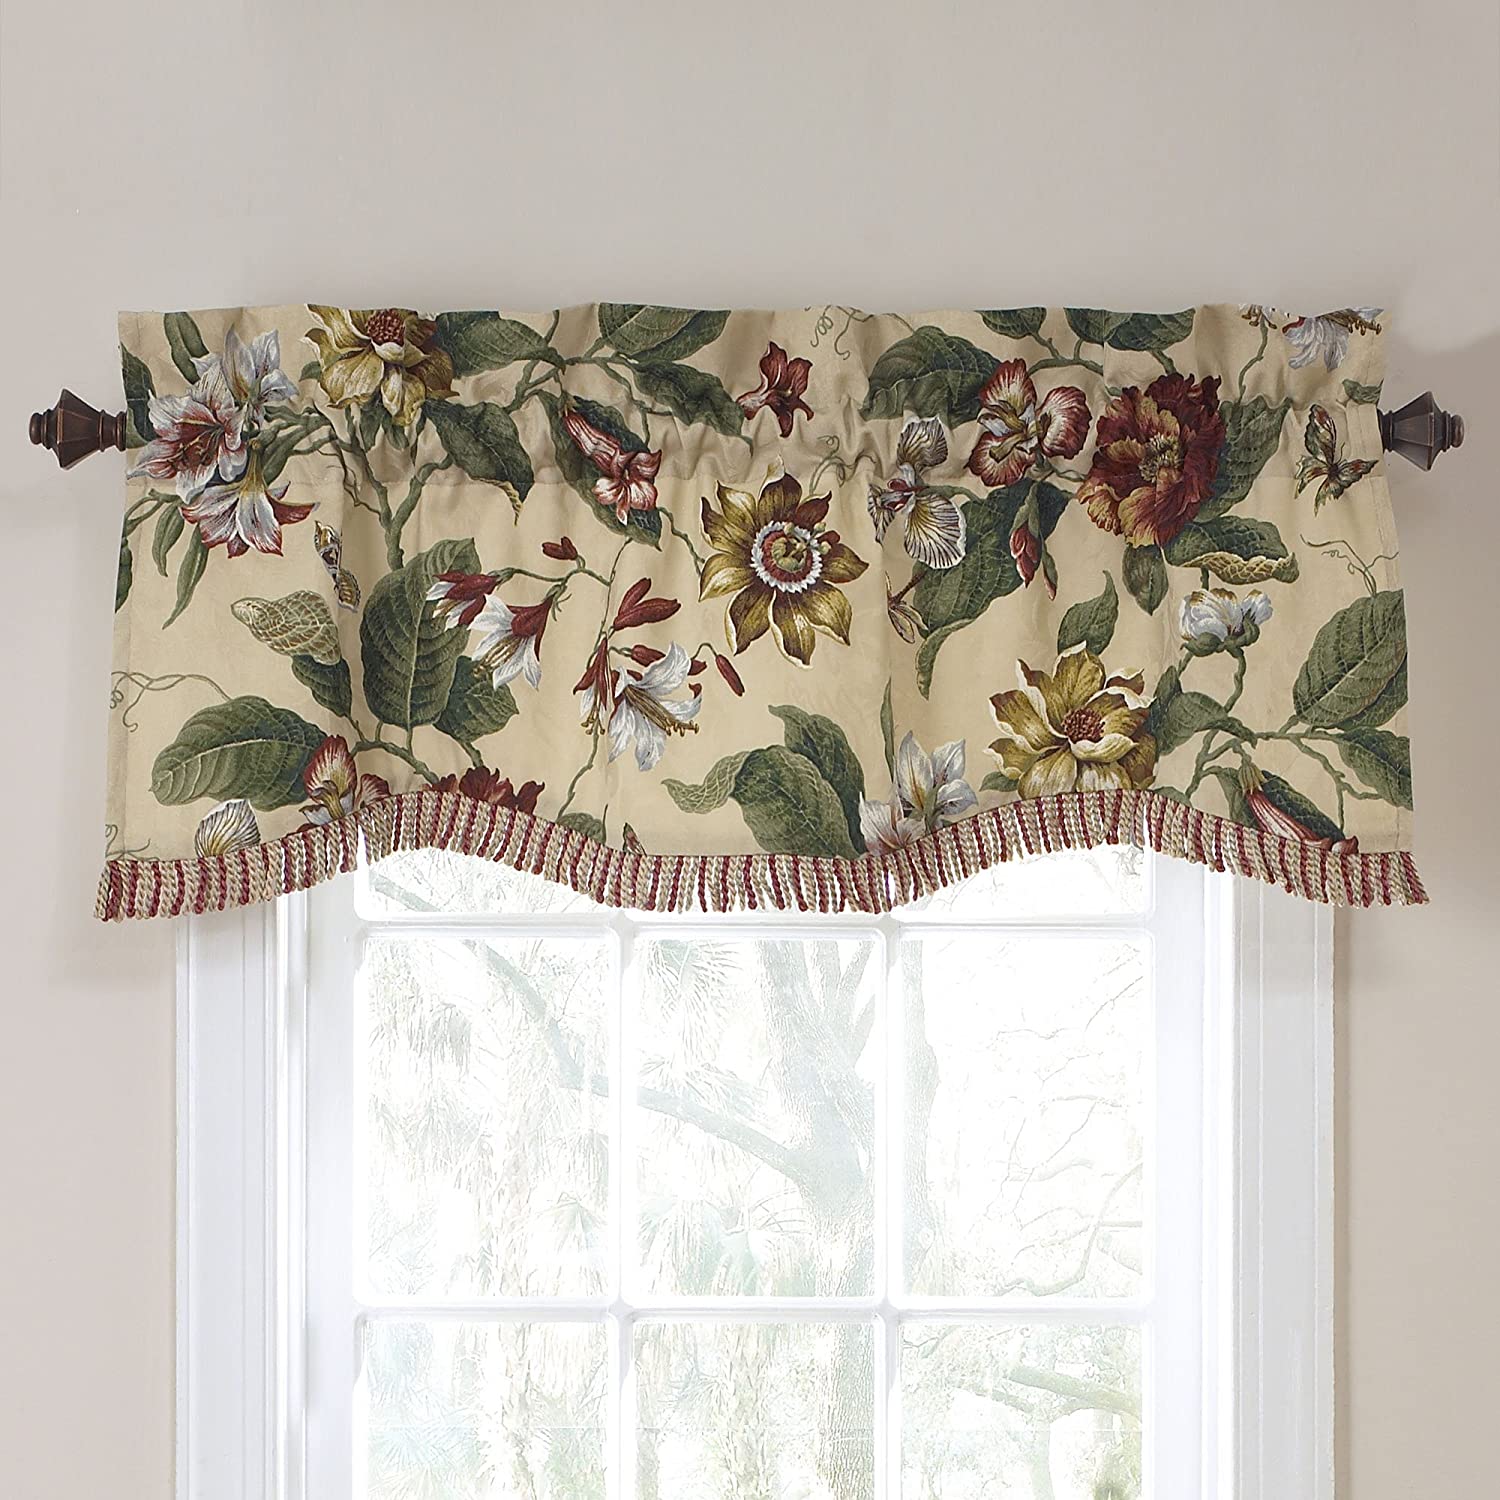 Laurel Springs by Waverly Valance Curtain in Parchment 50 x 15